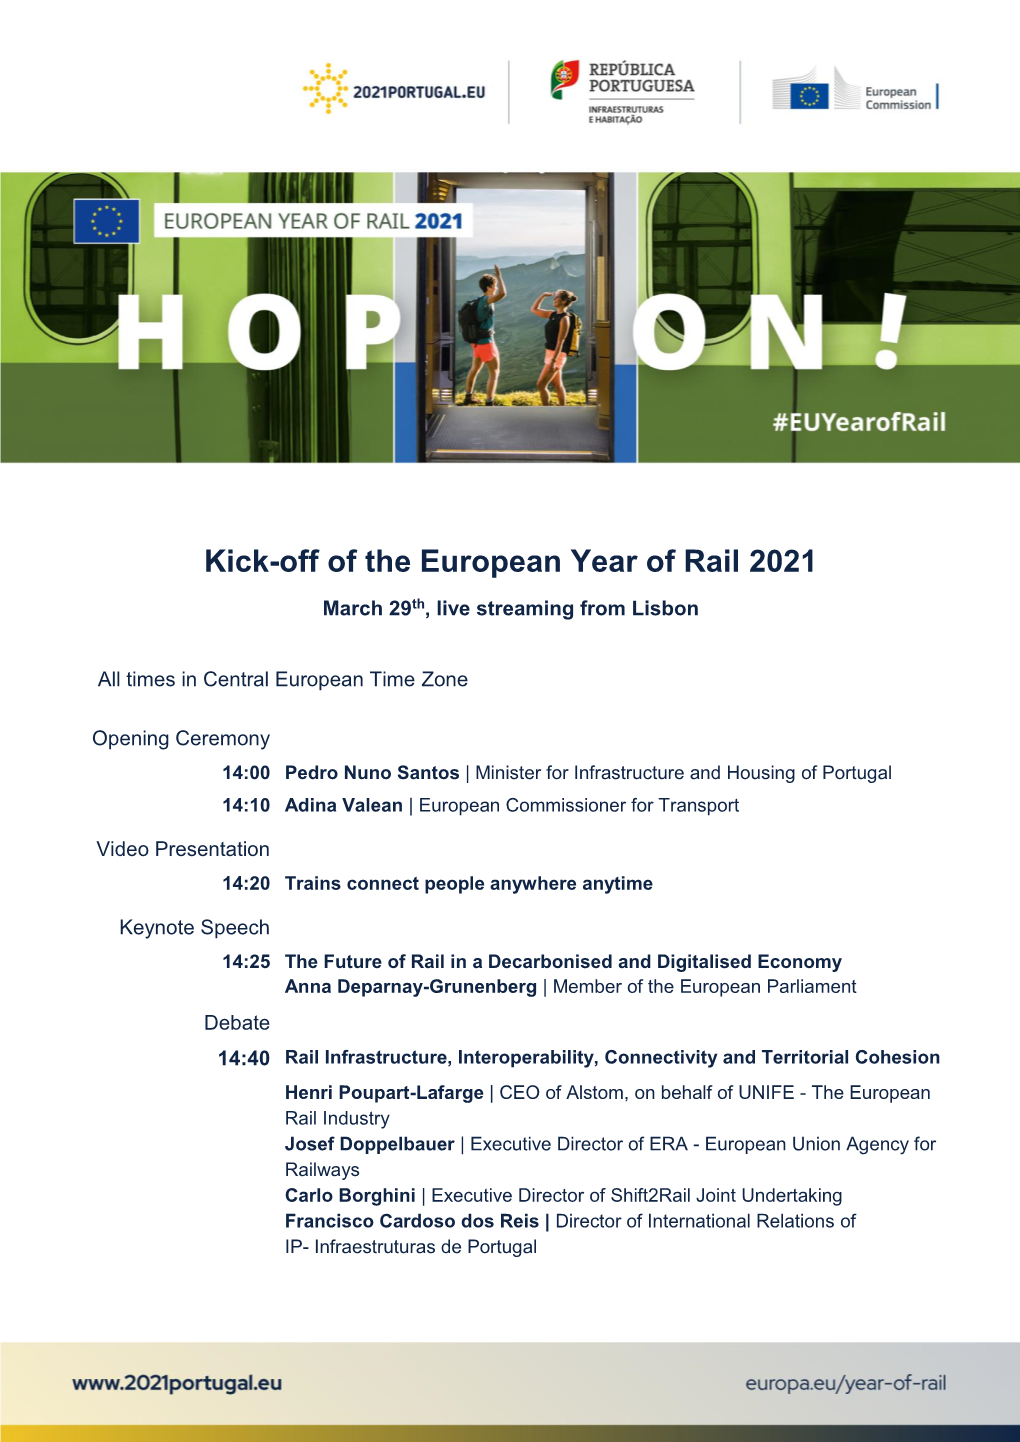 Kick-Off of the European Year of Rail 2021